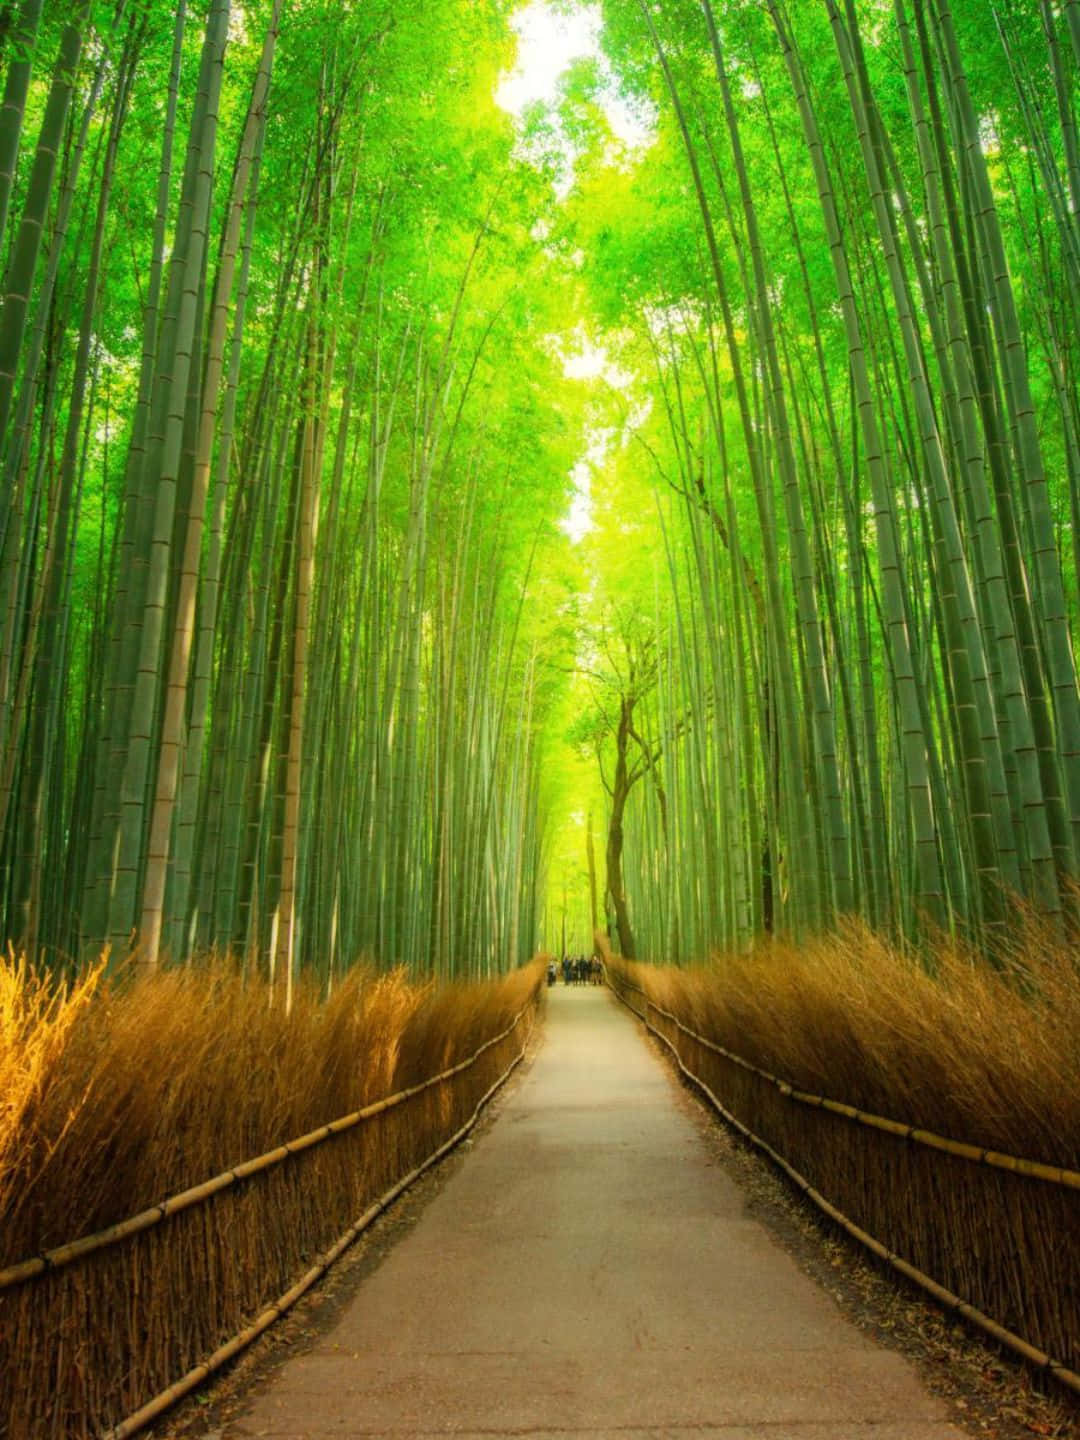 1440p Bamboo Background Clear Path In Between Bamboo Trees